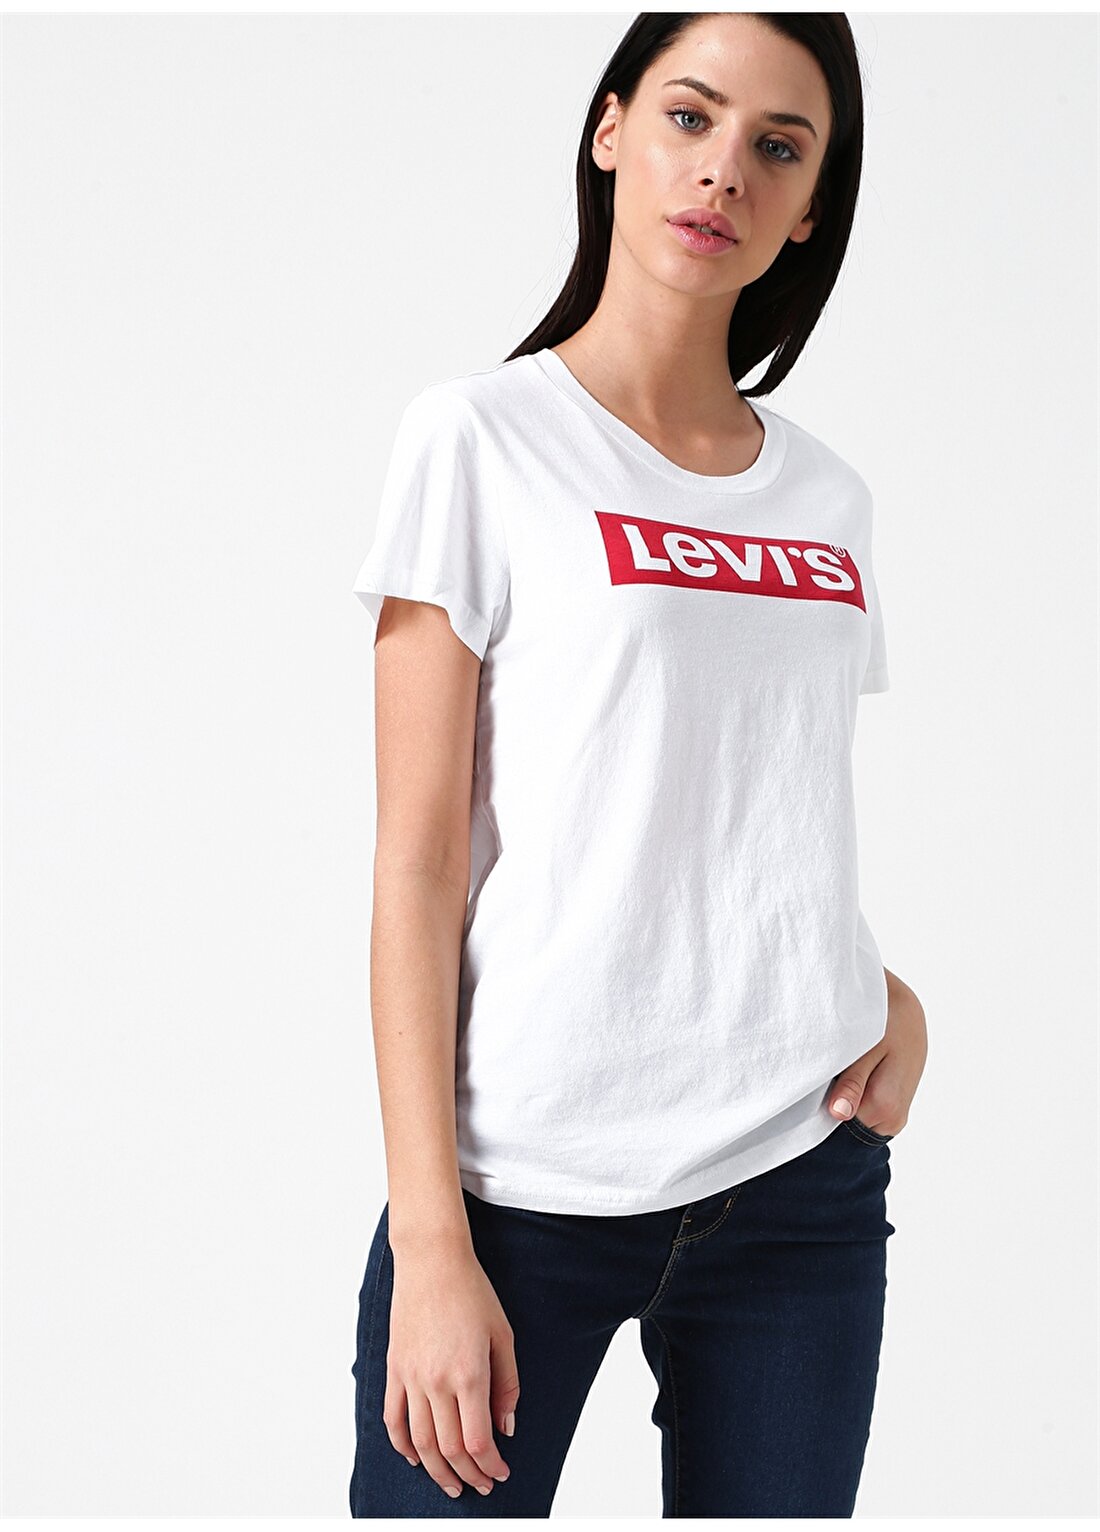 Levis The Perfect Tee New Red Box Tab White T-Shirt